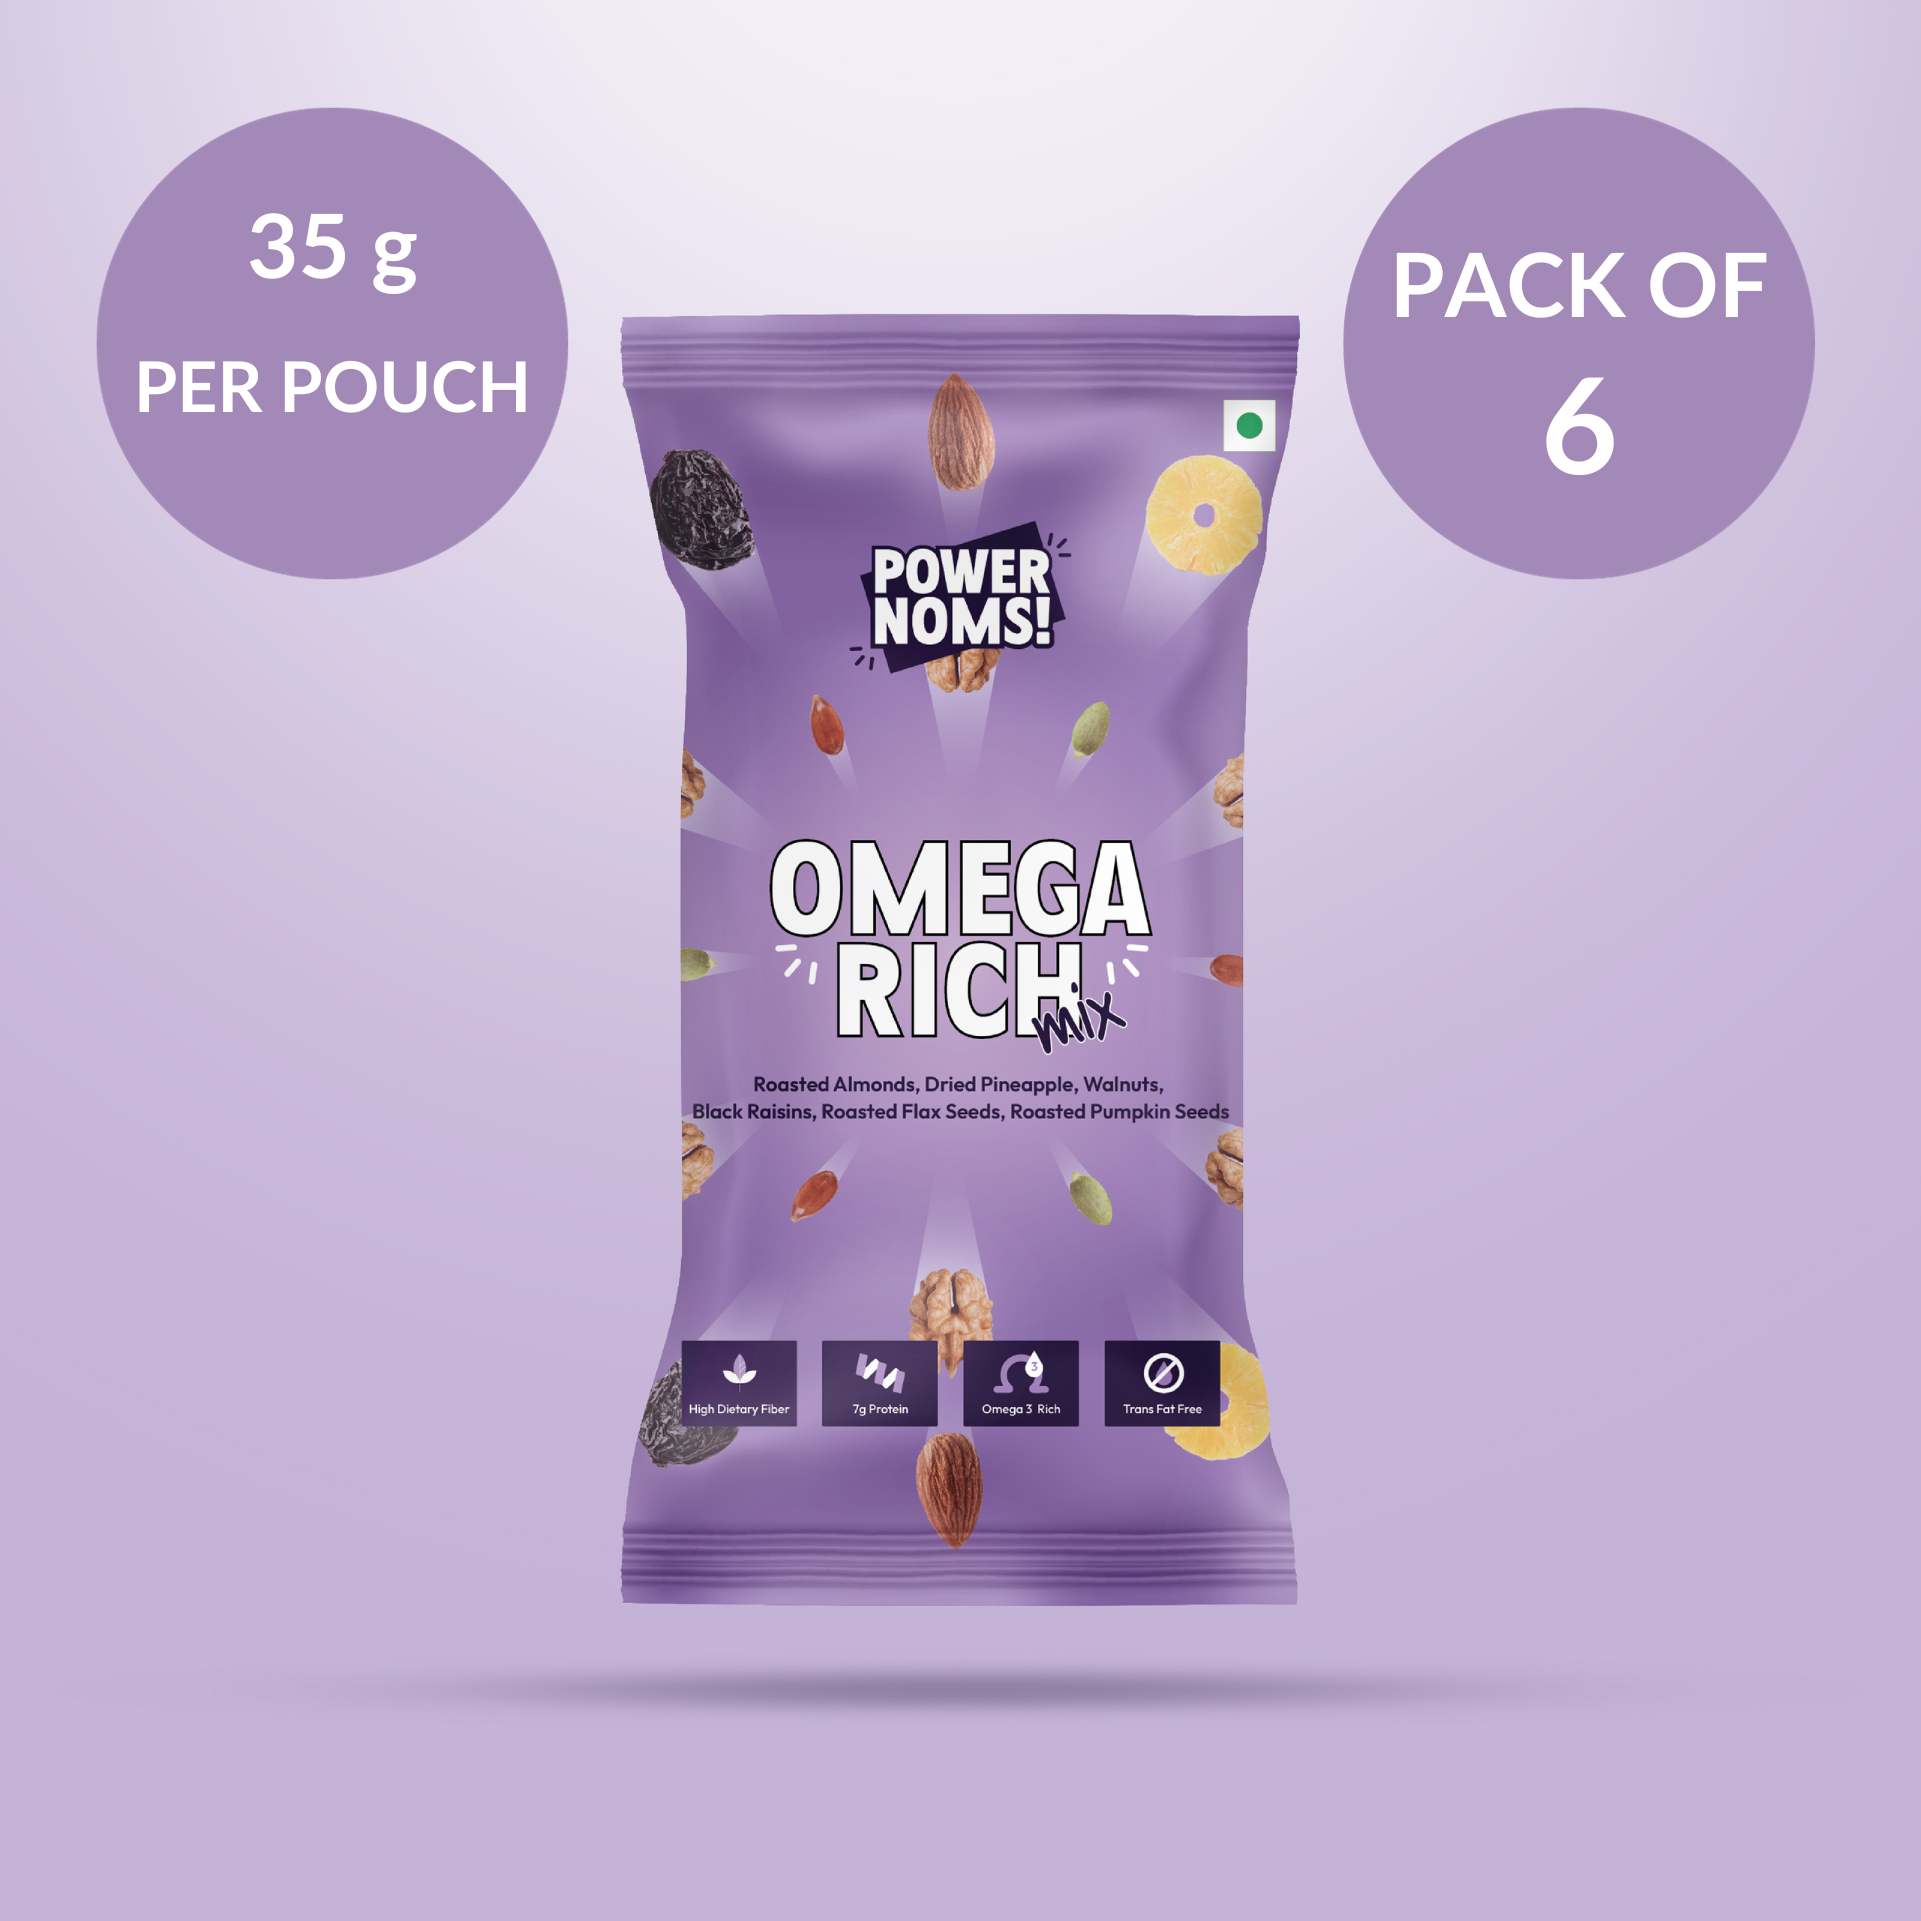 powernoms omega rich mix pack of 6